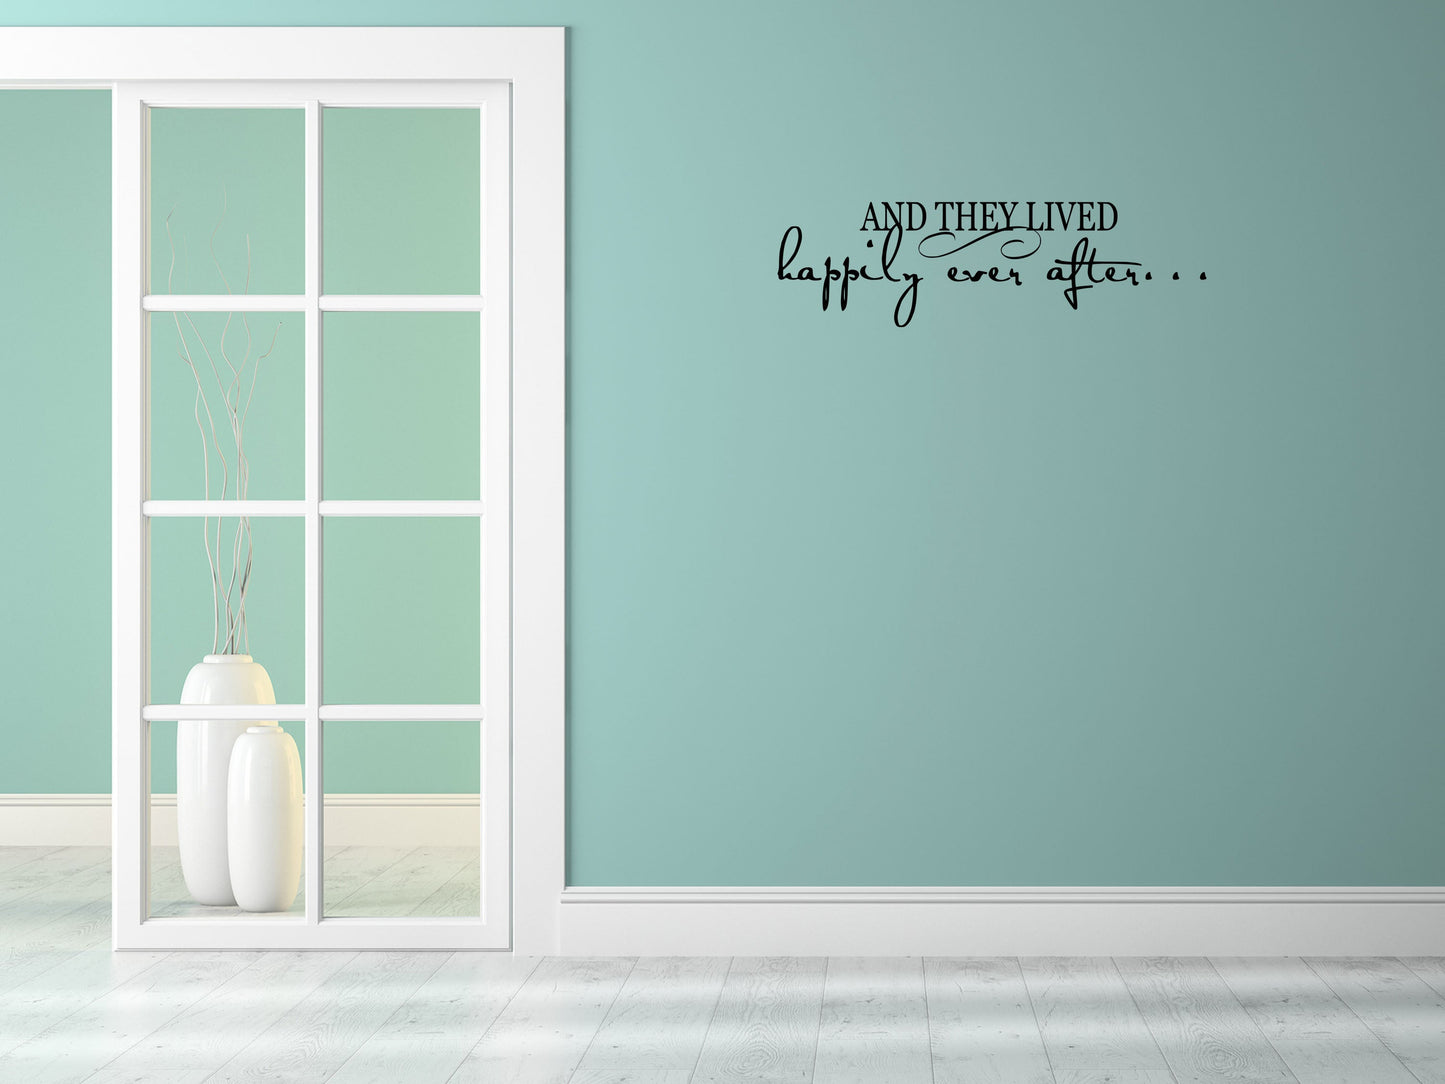 They Lived Happily Ever After - Inspirational Wall Decals Vinyl Wall Decal Done 